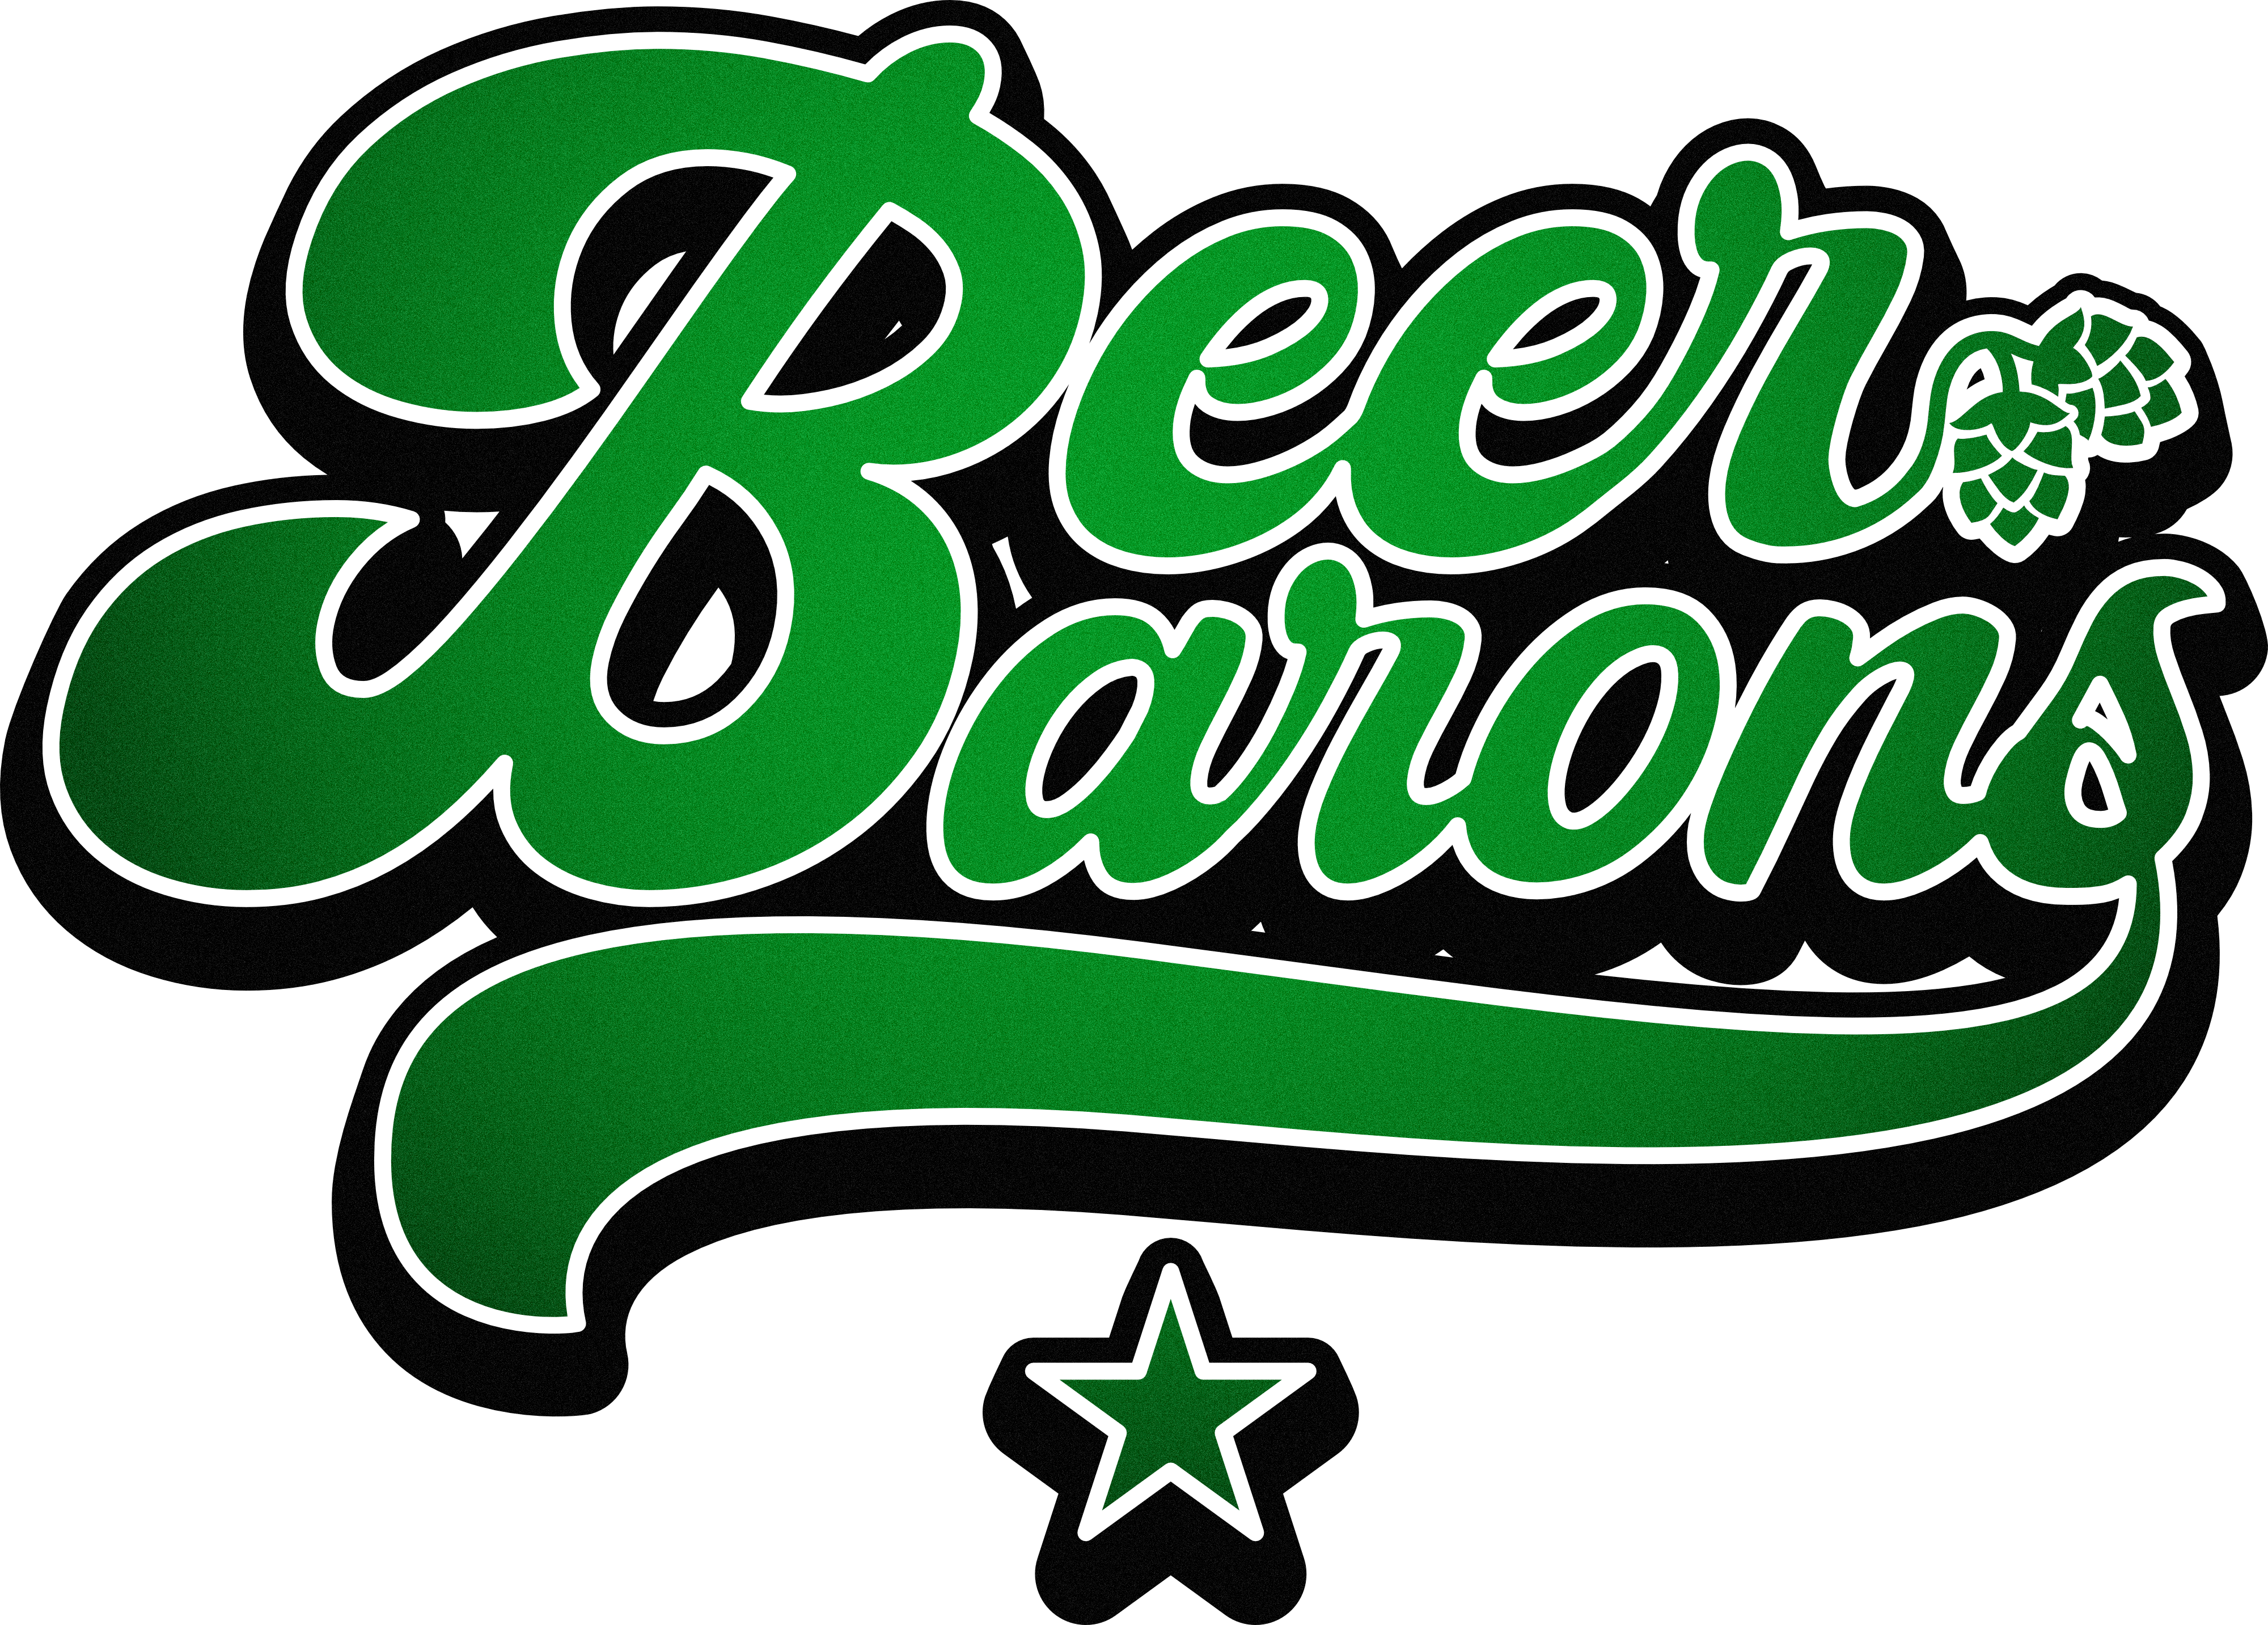 We’re a couple of Beer Barons!